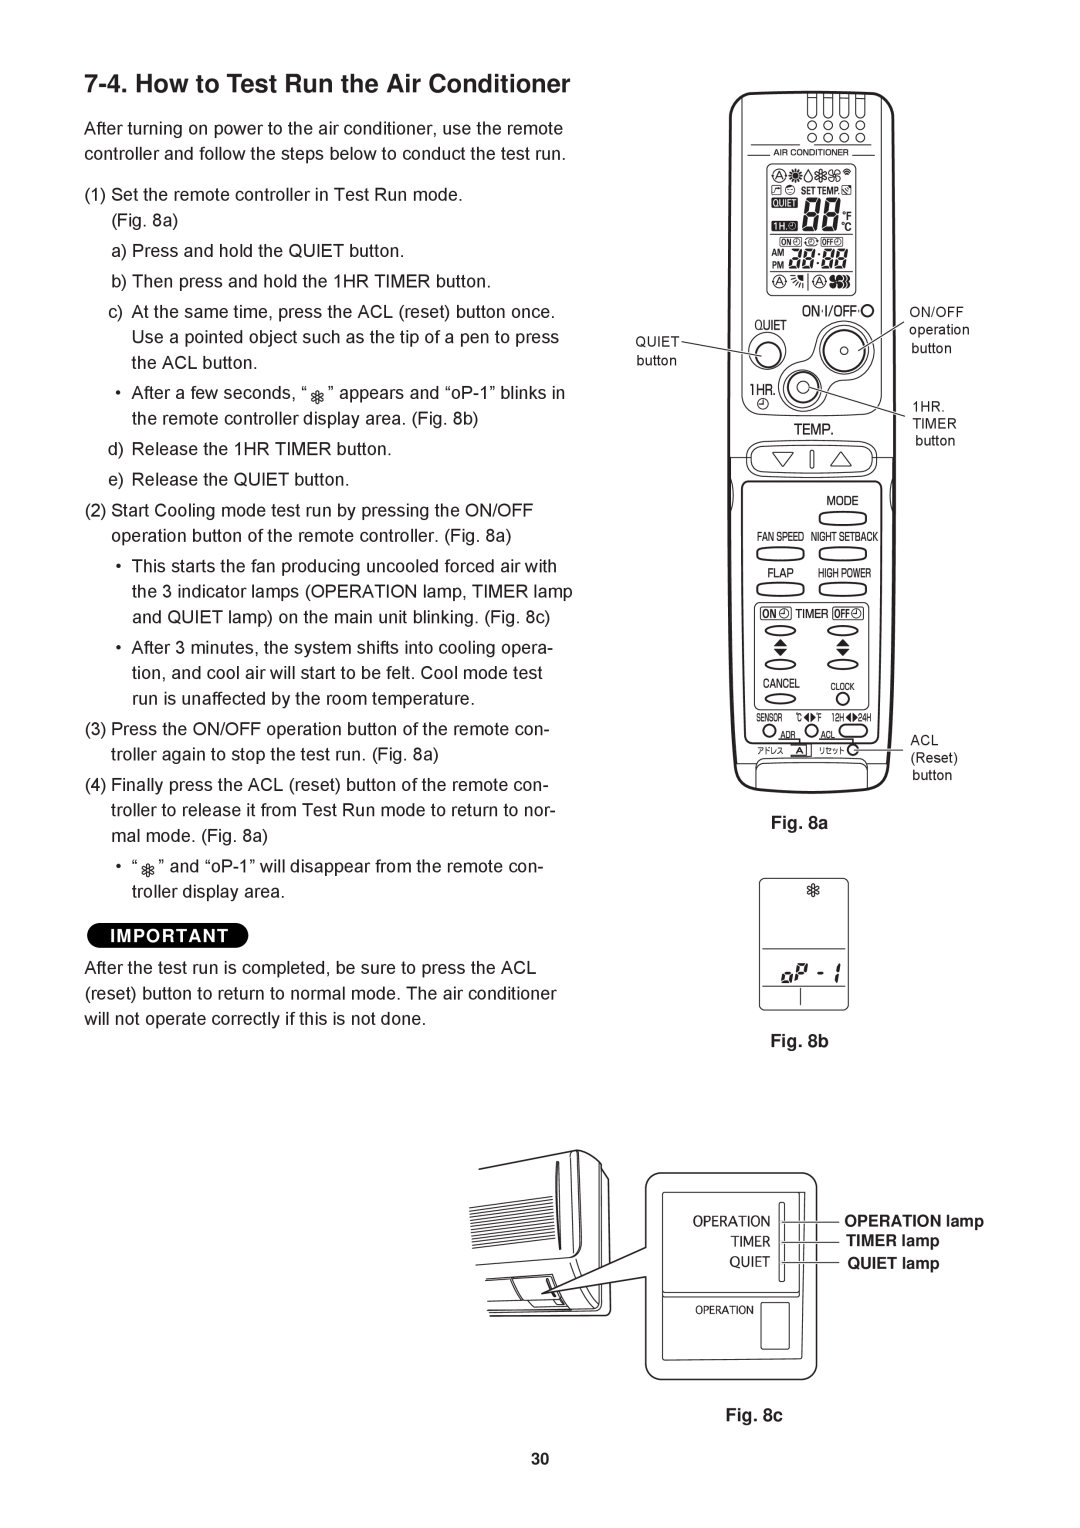 Sanyo SAP-CRV123EH, SAP-KRV123EH, SAP-KRV93EH, SAP-CRV93EH service manual How to Test Run the Air Conditioner, a b 